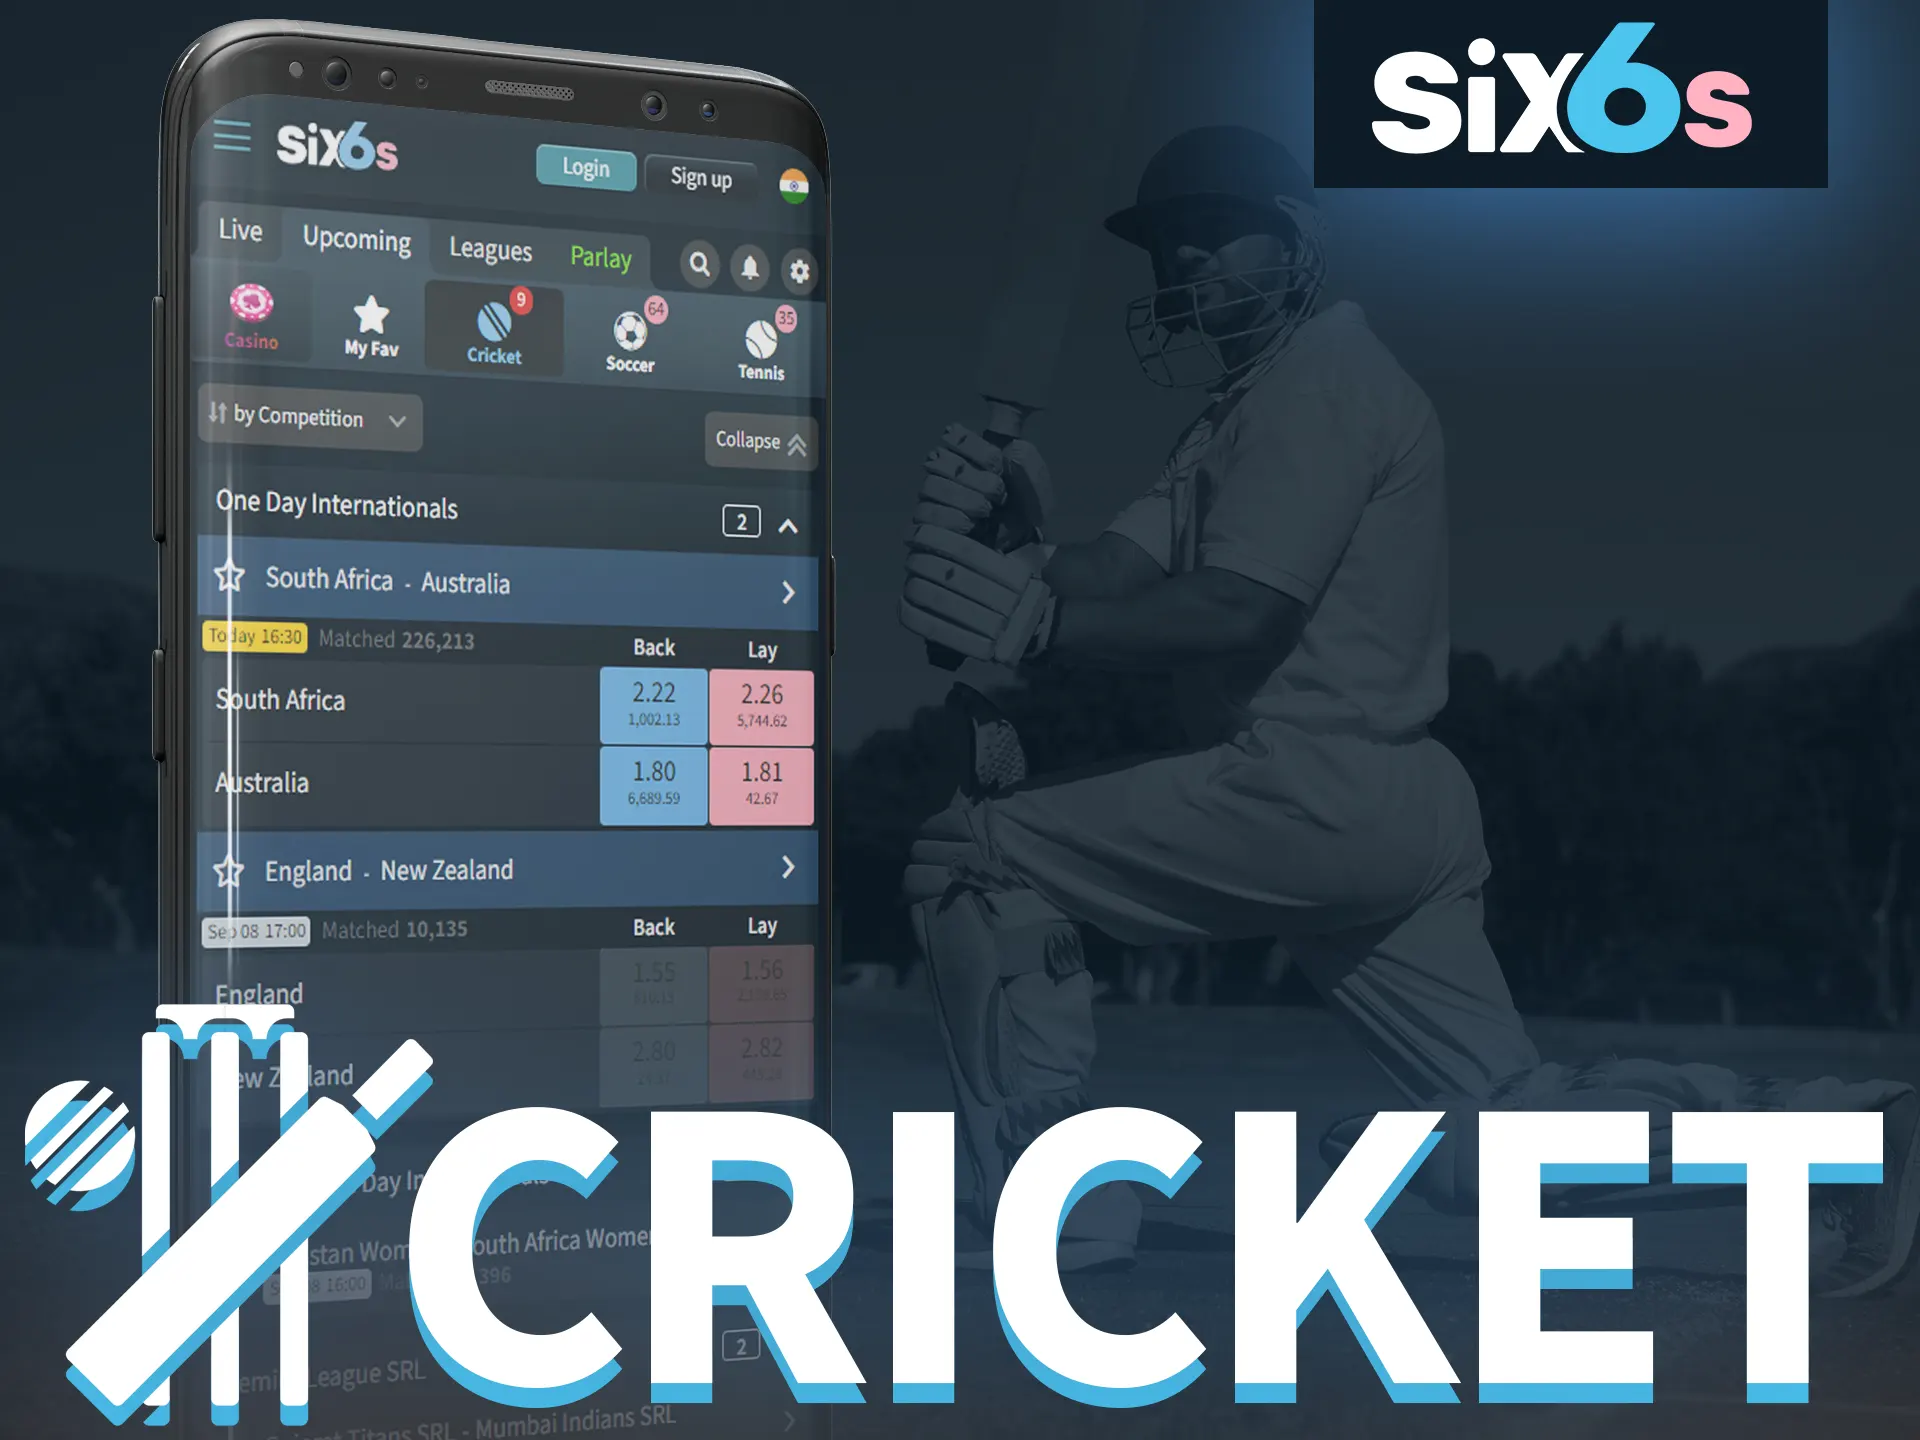 Bet on cricket matches with Six6s.